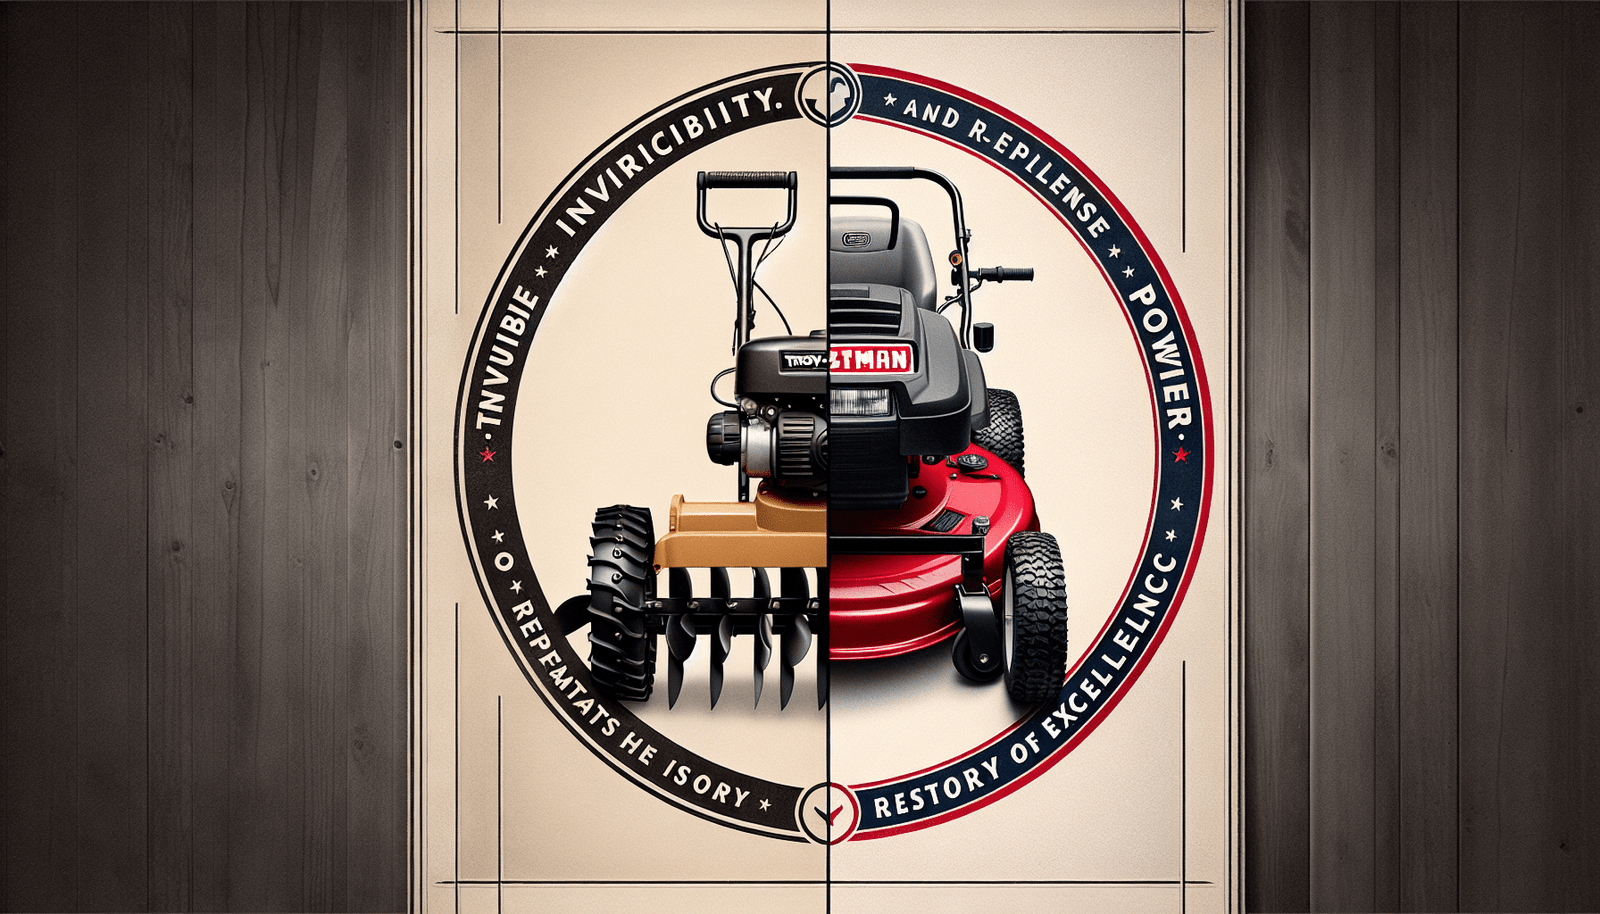 Are Troy-Bilt And Craftsman Made By The Same Company?